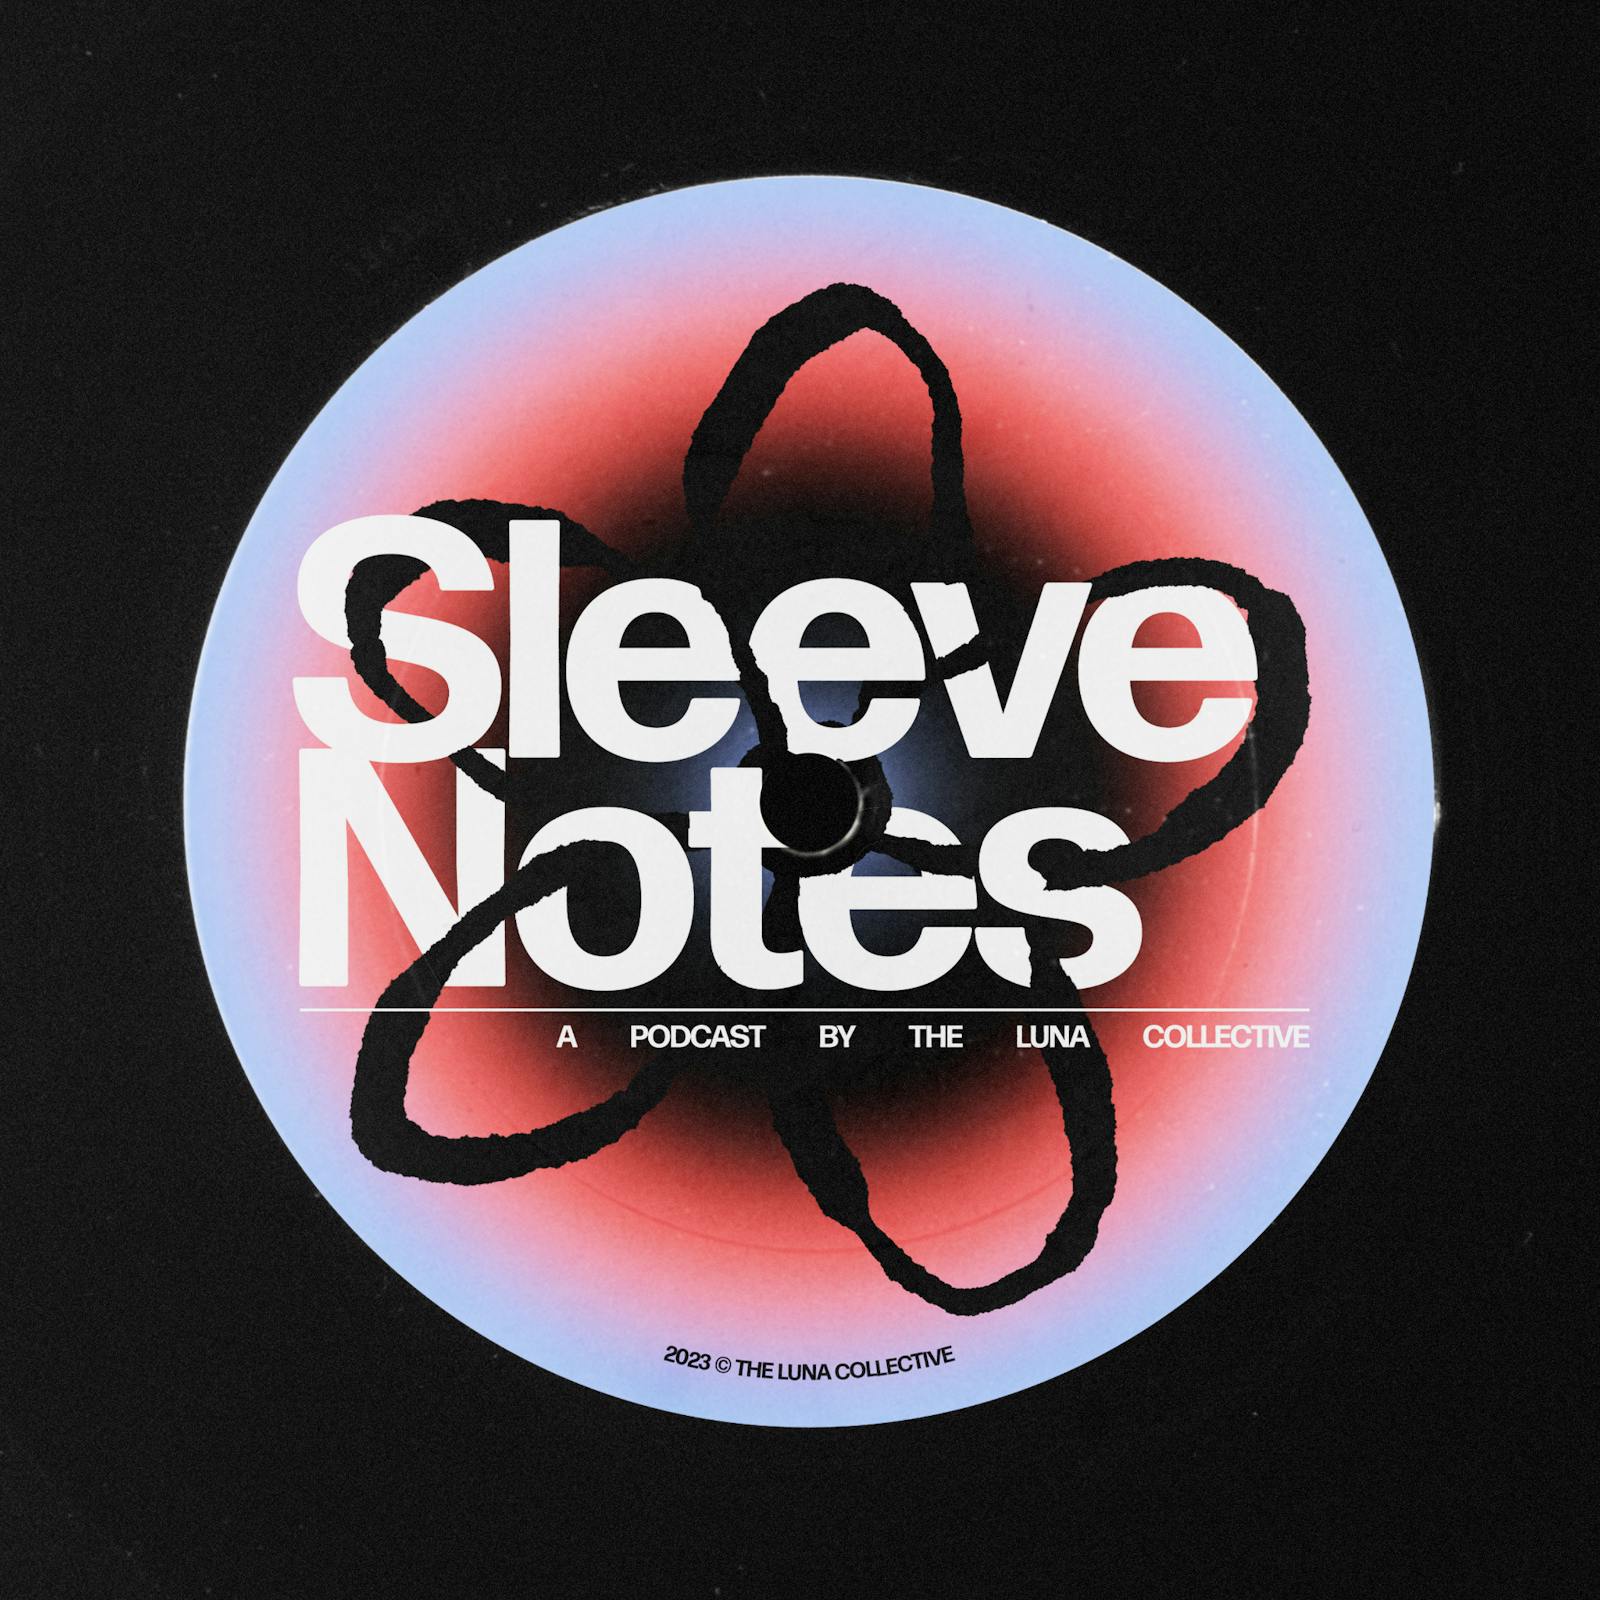 Sleeve Notes Podcast